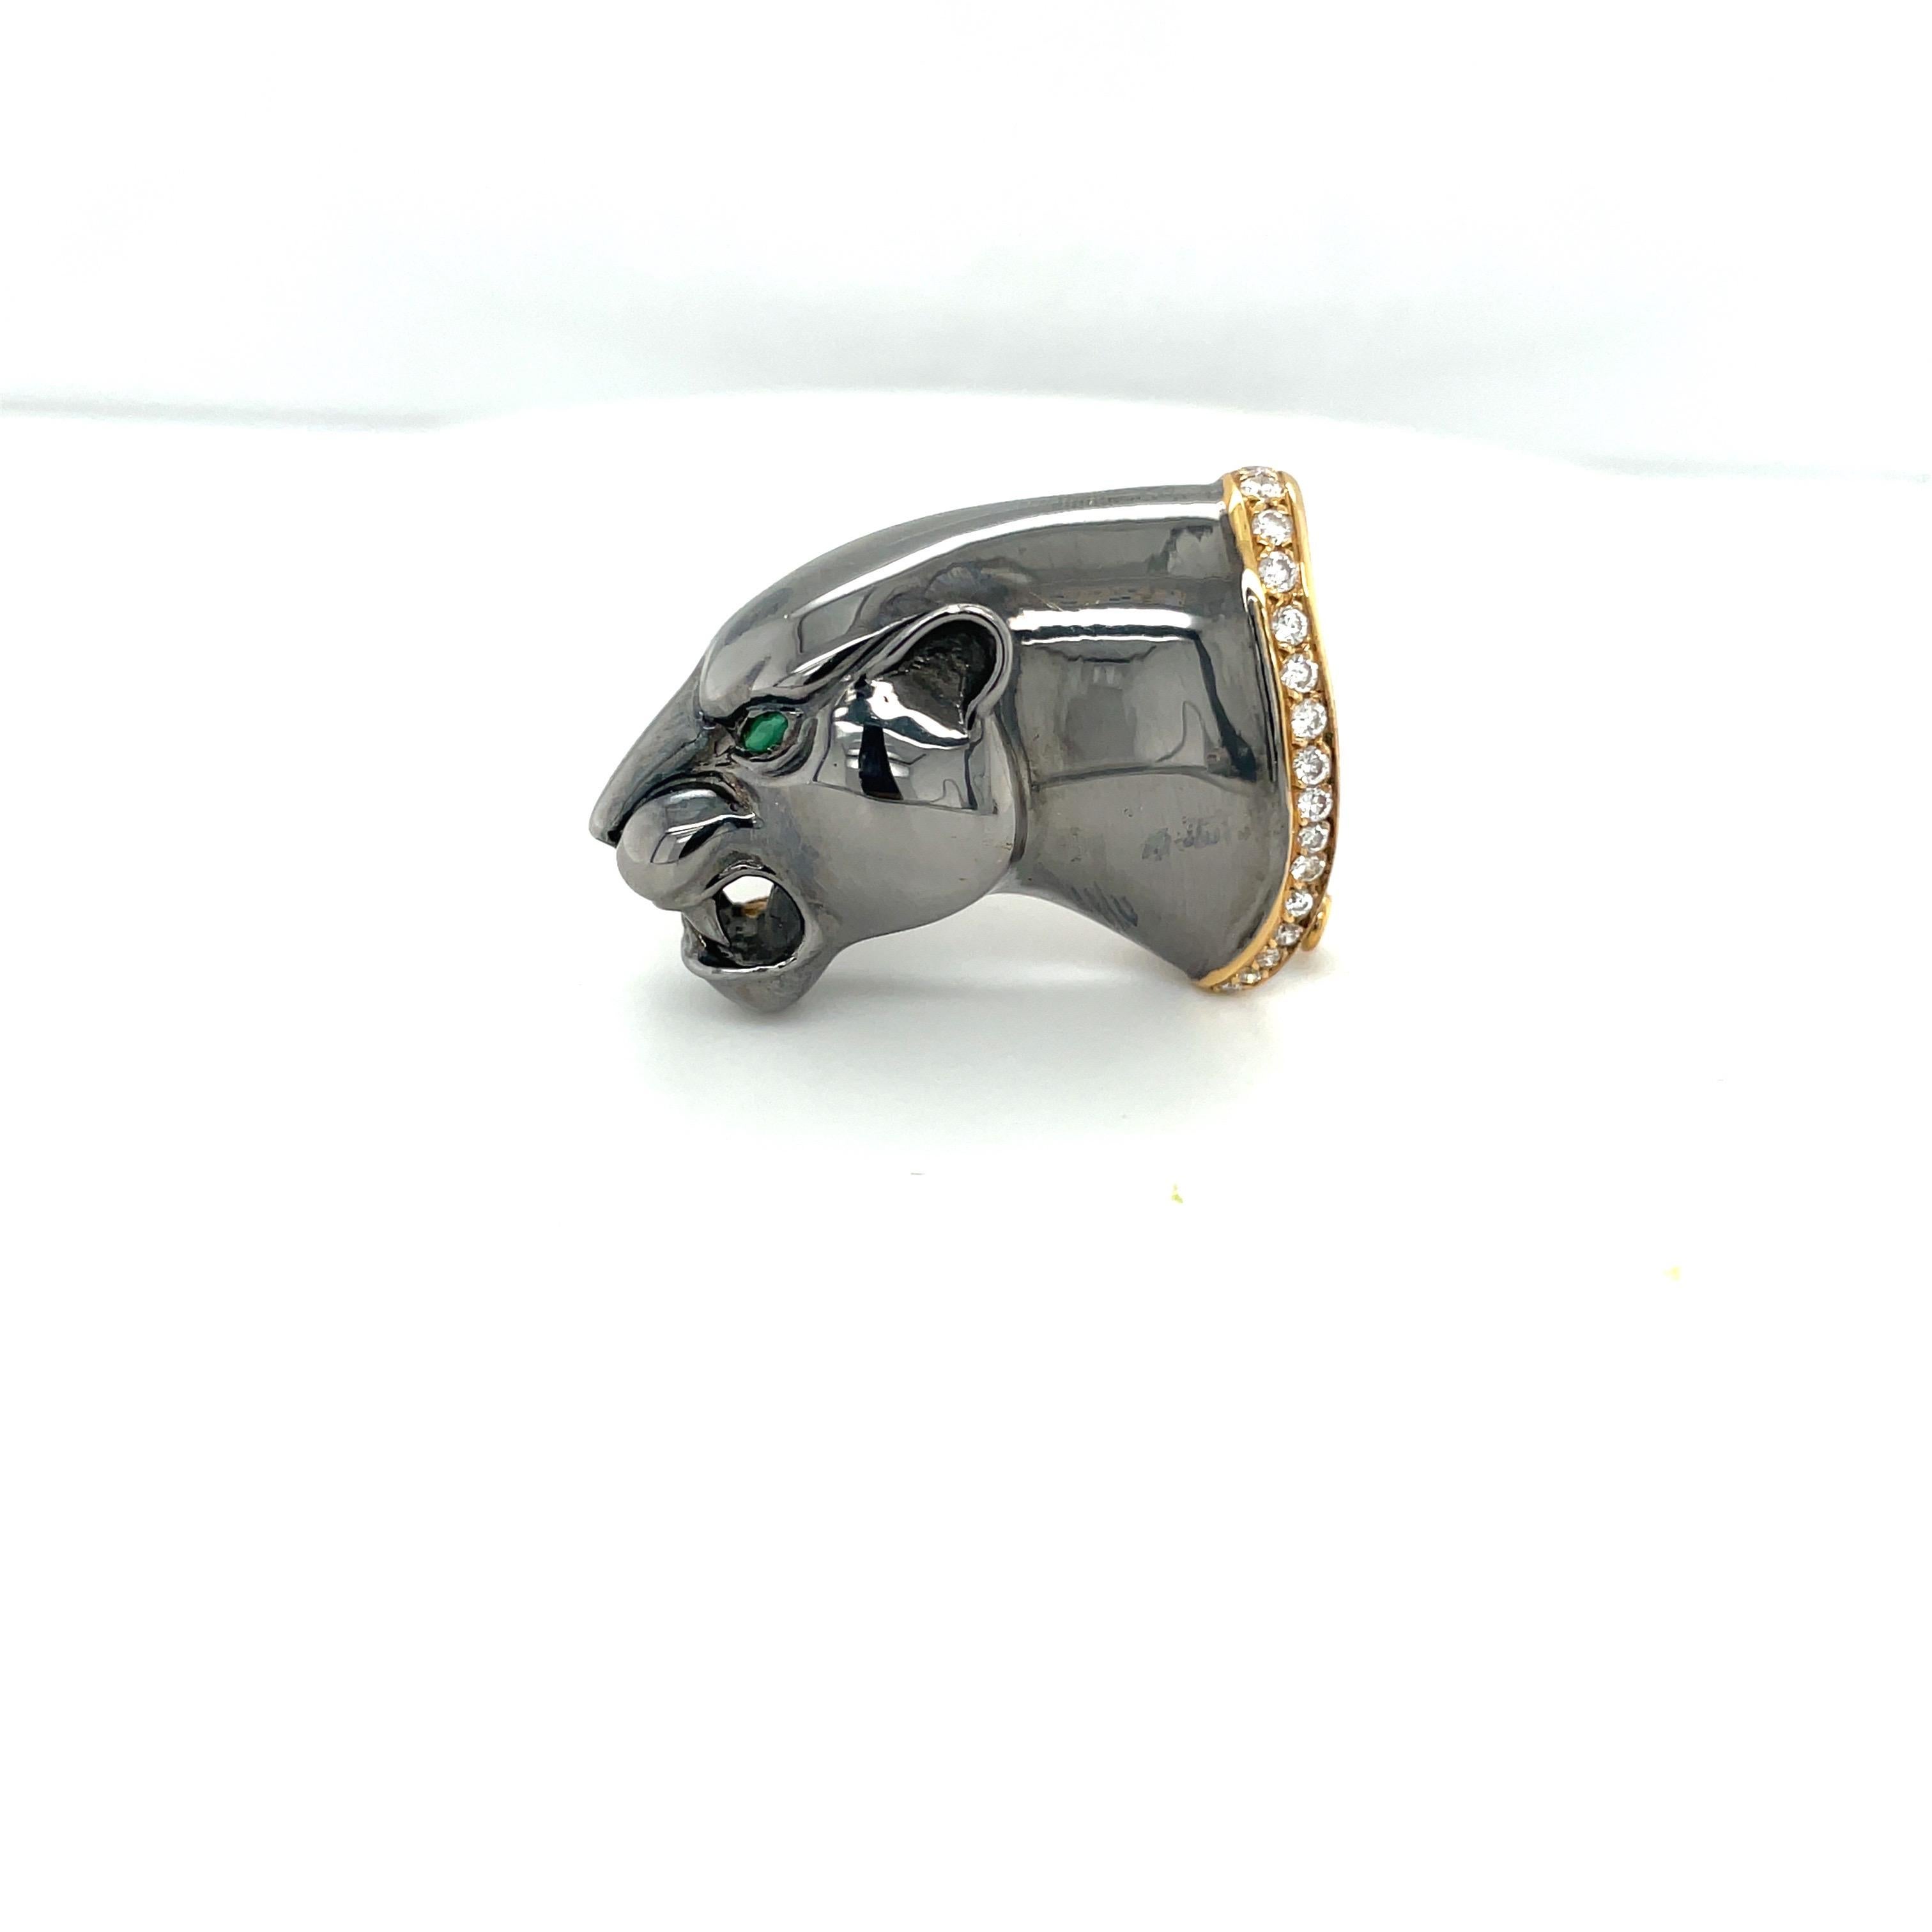 Round Cut Cellini 18KT Blackened Gold Panther Brooch with Diamond 0.30Ct and Emerald For Sale